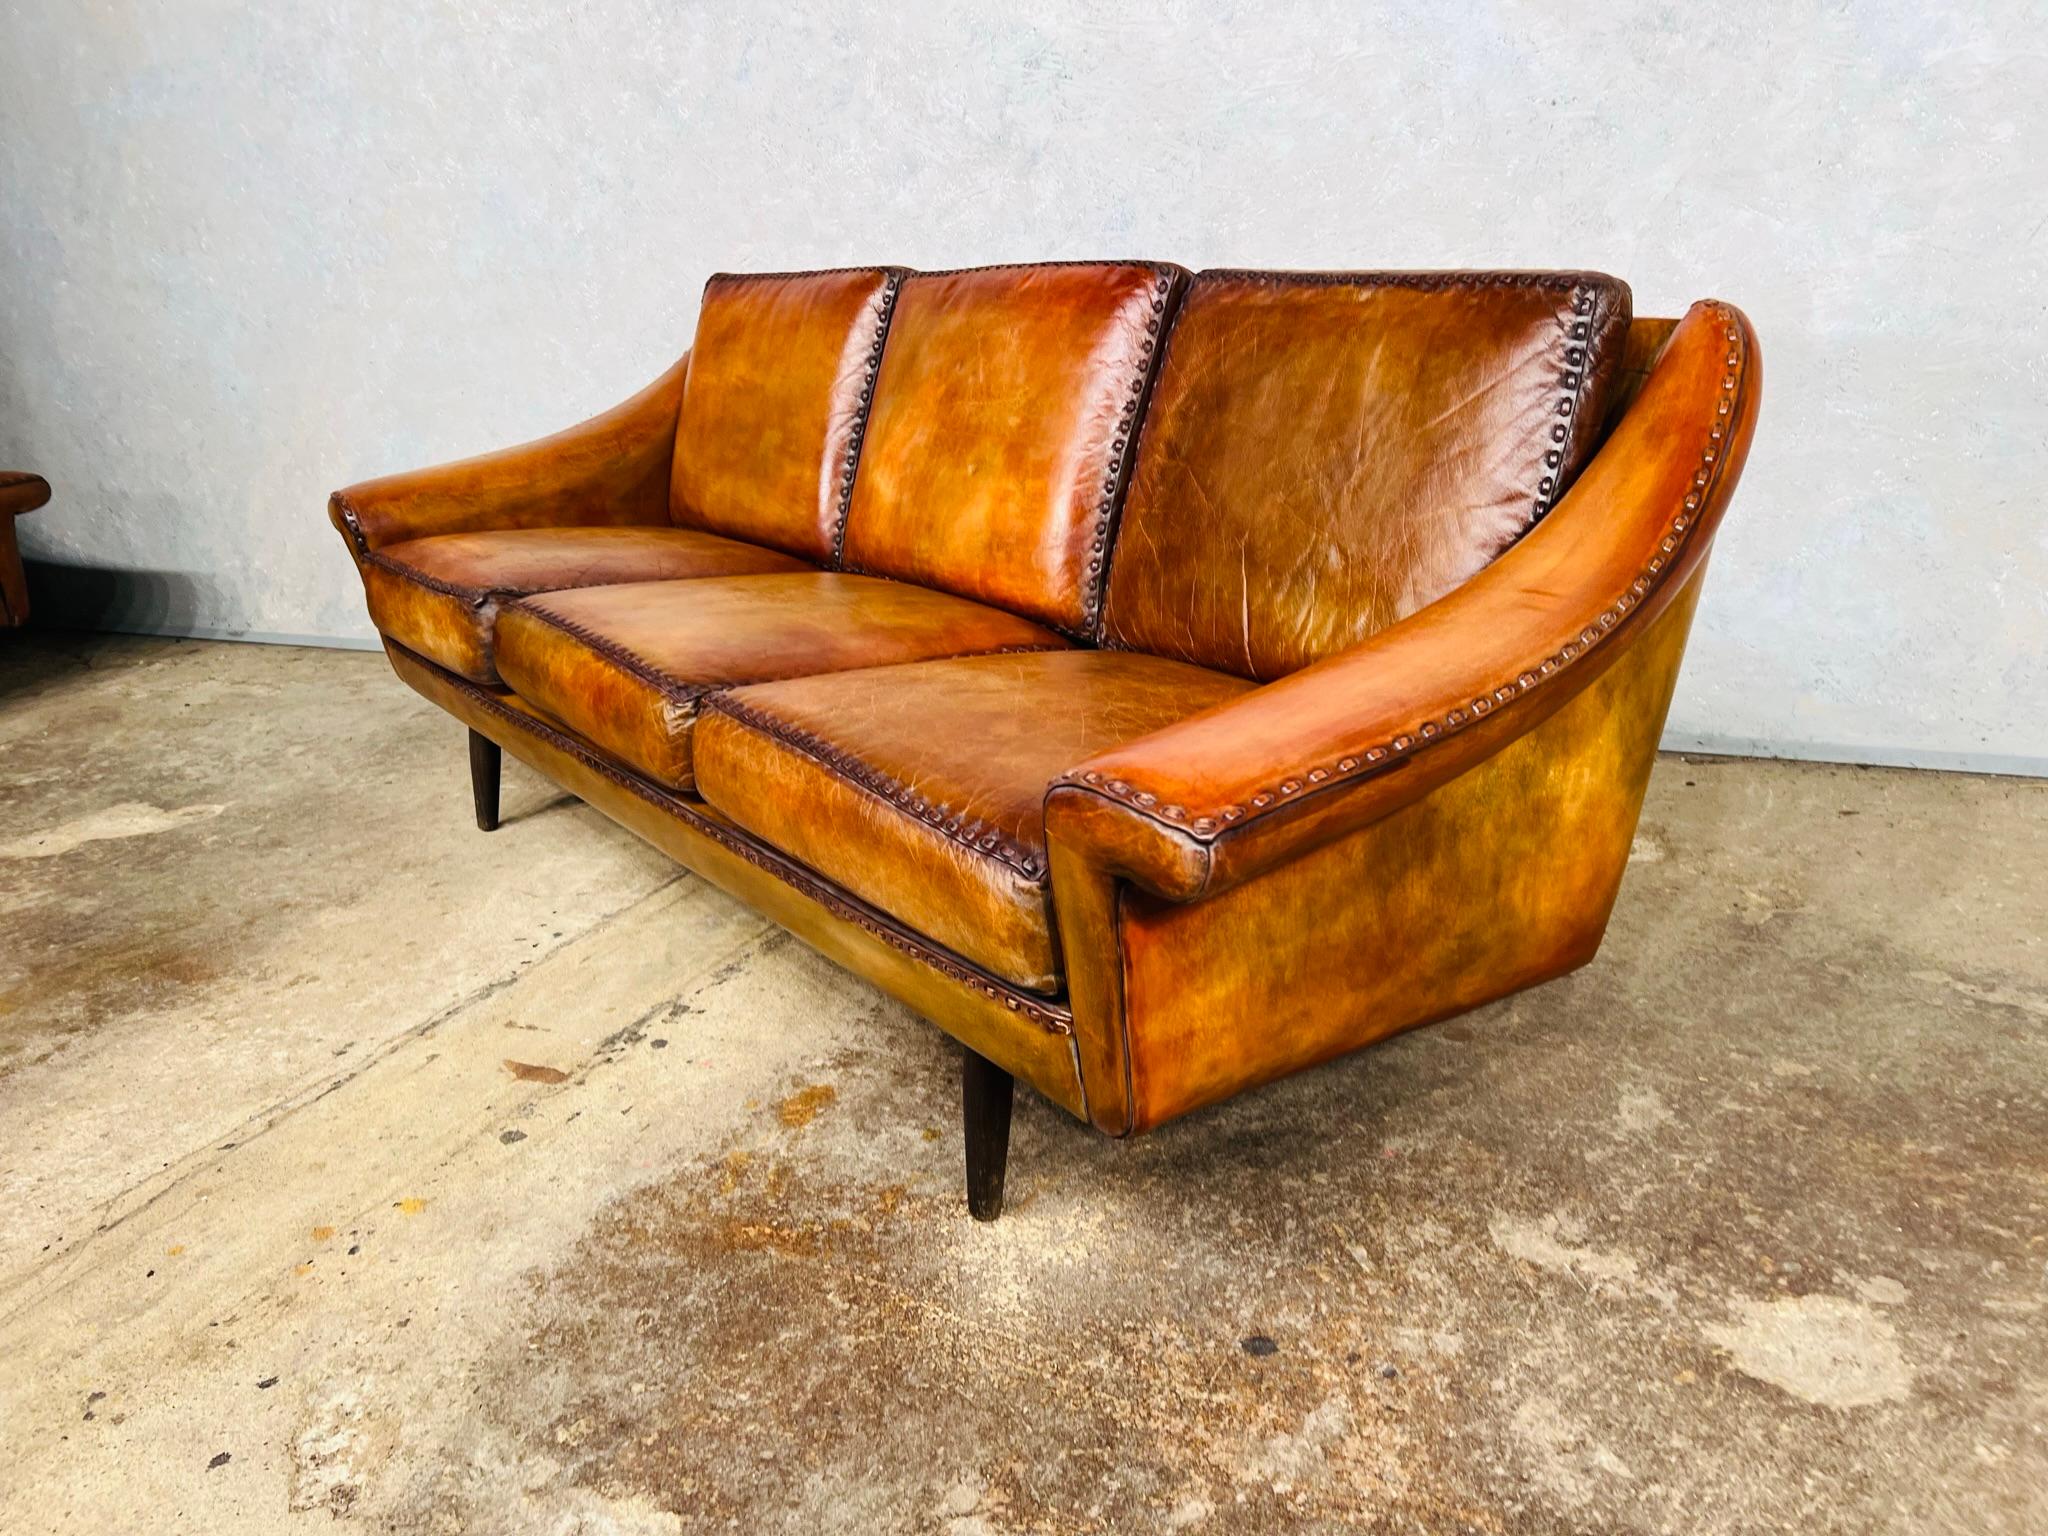 Matador Leather 3 Seater Sofa by Aage Christiansen for Eran 1960s #642 For Sale 7